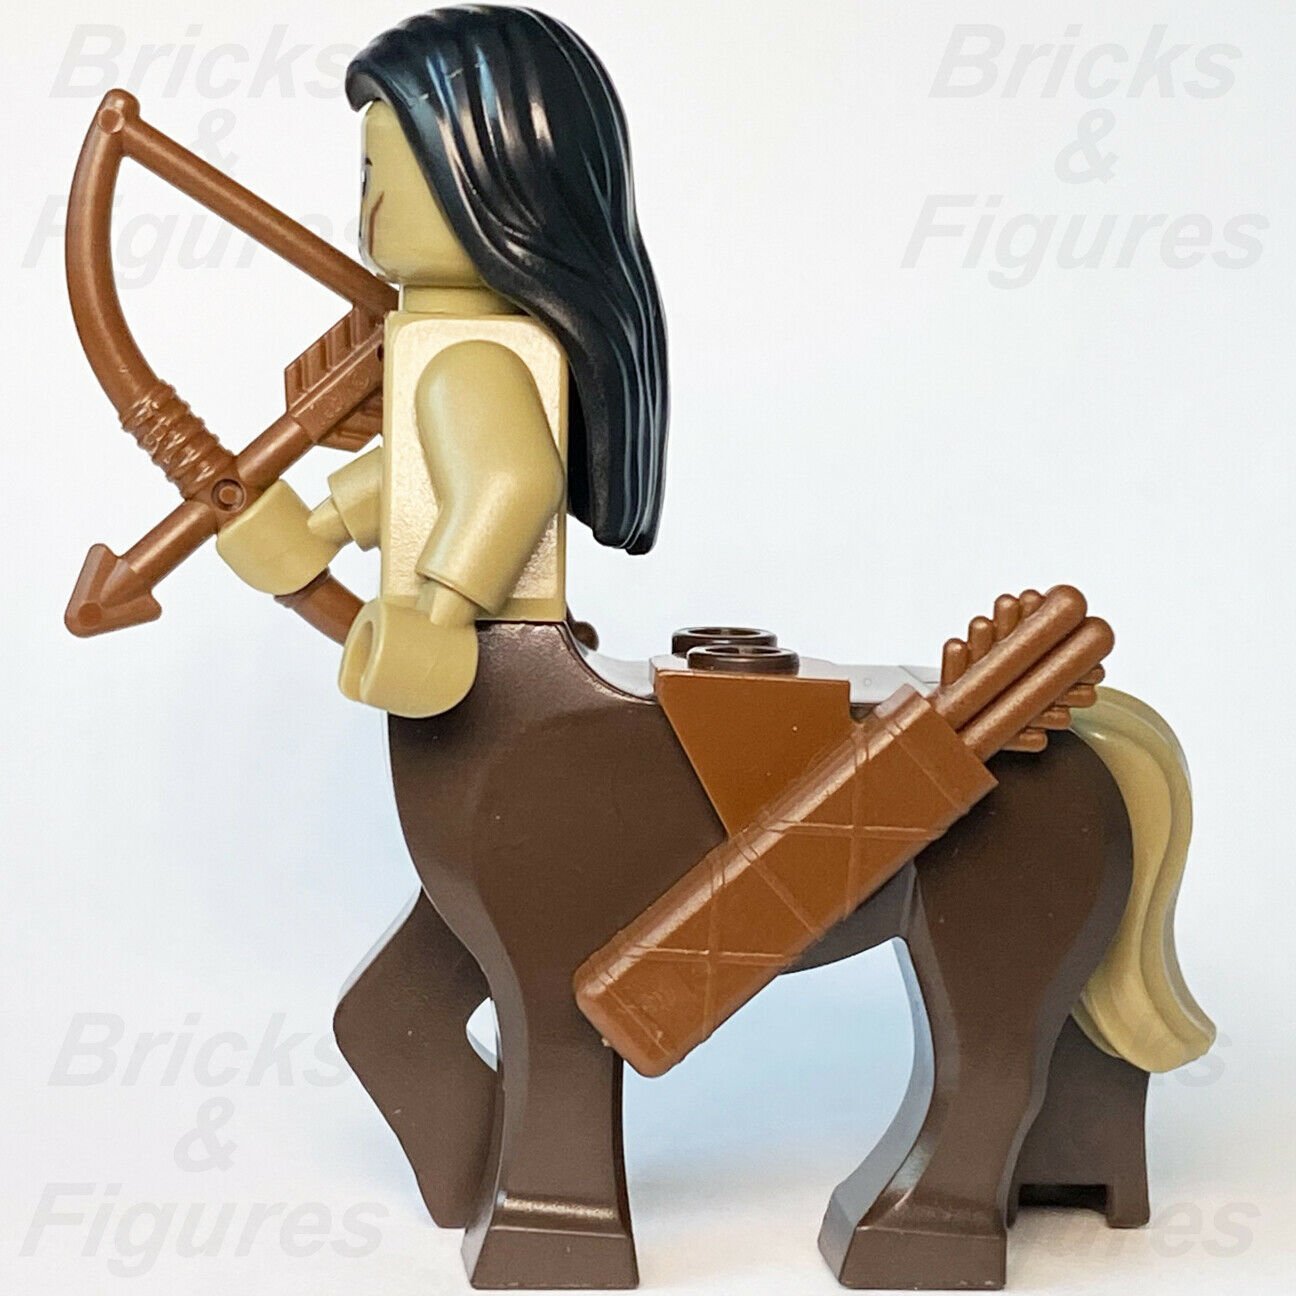 New Harry Potter LEGO Centaur with Bow & Quiver Minifigure from set 75967 - Bricks & Figures